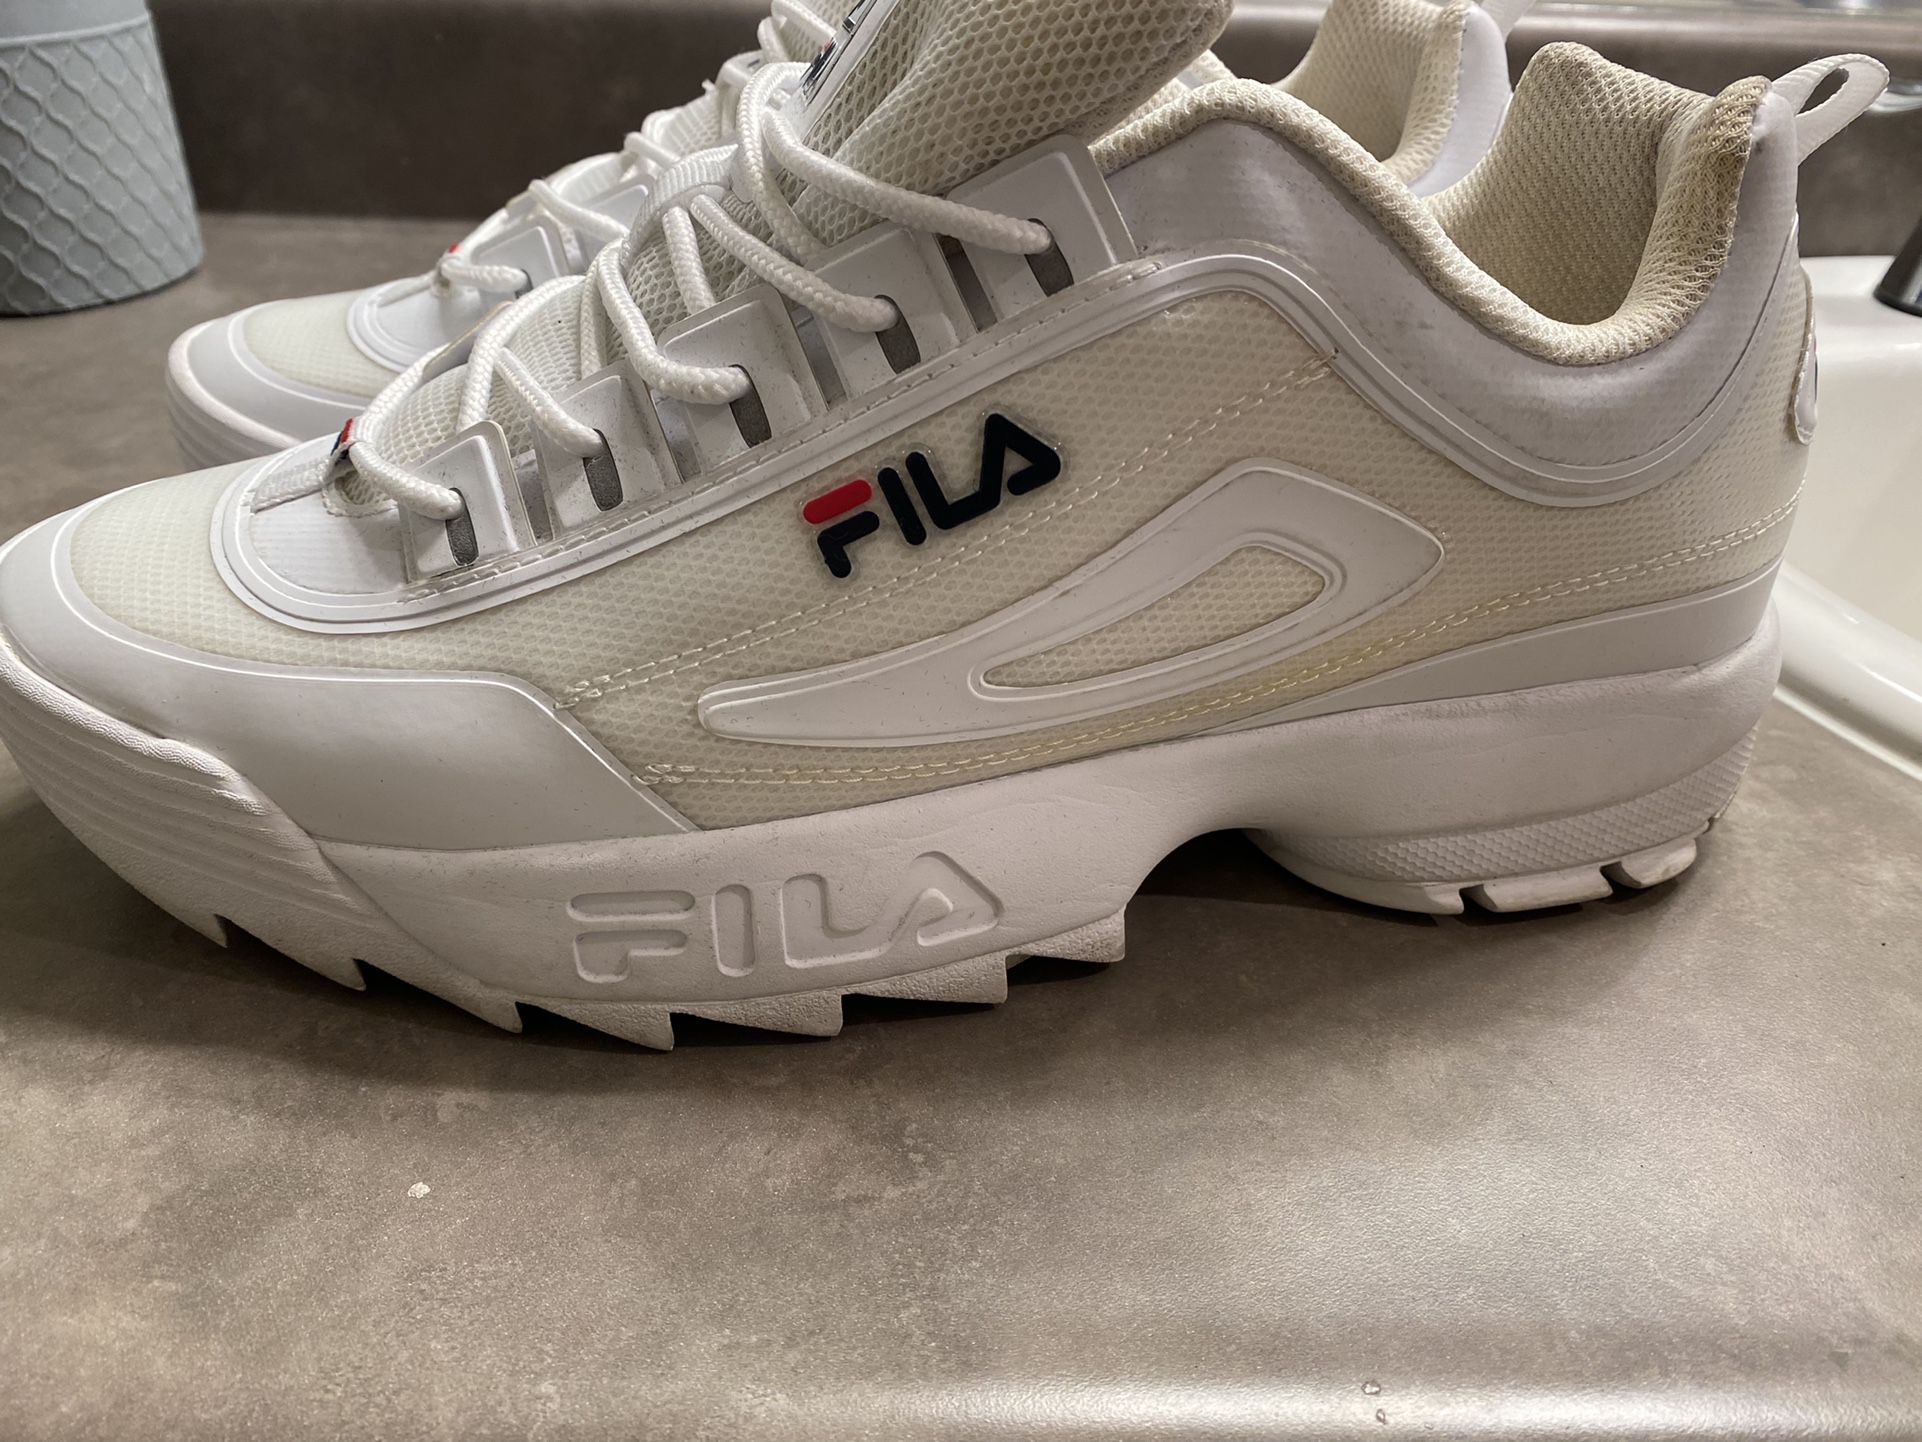 Ounce joggen mode Fila Disruptor 2 For Men for Sale in Los Angeles, CA - OfferUp